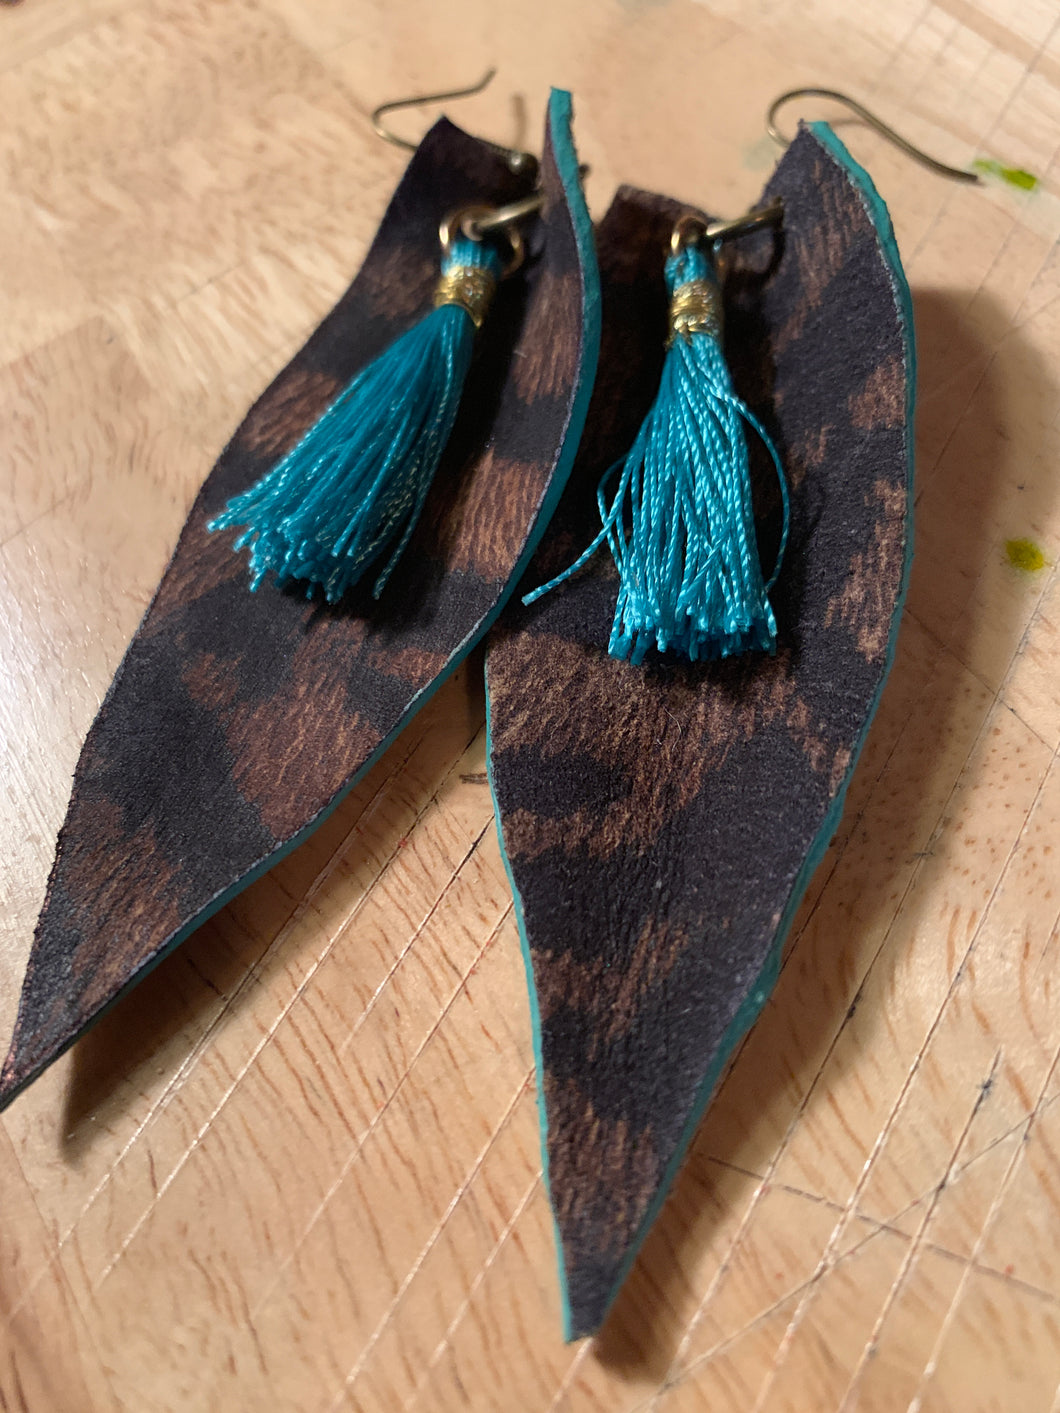 Leather Safari Printed Pigskin with Turquoise Tassels & Edging